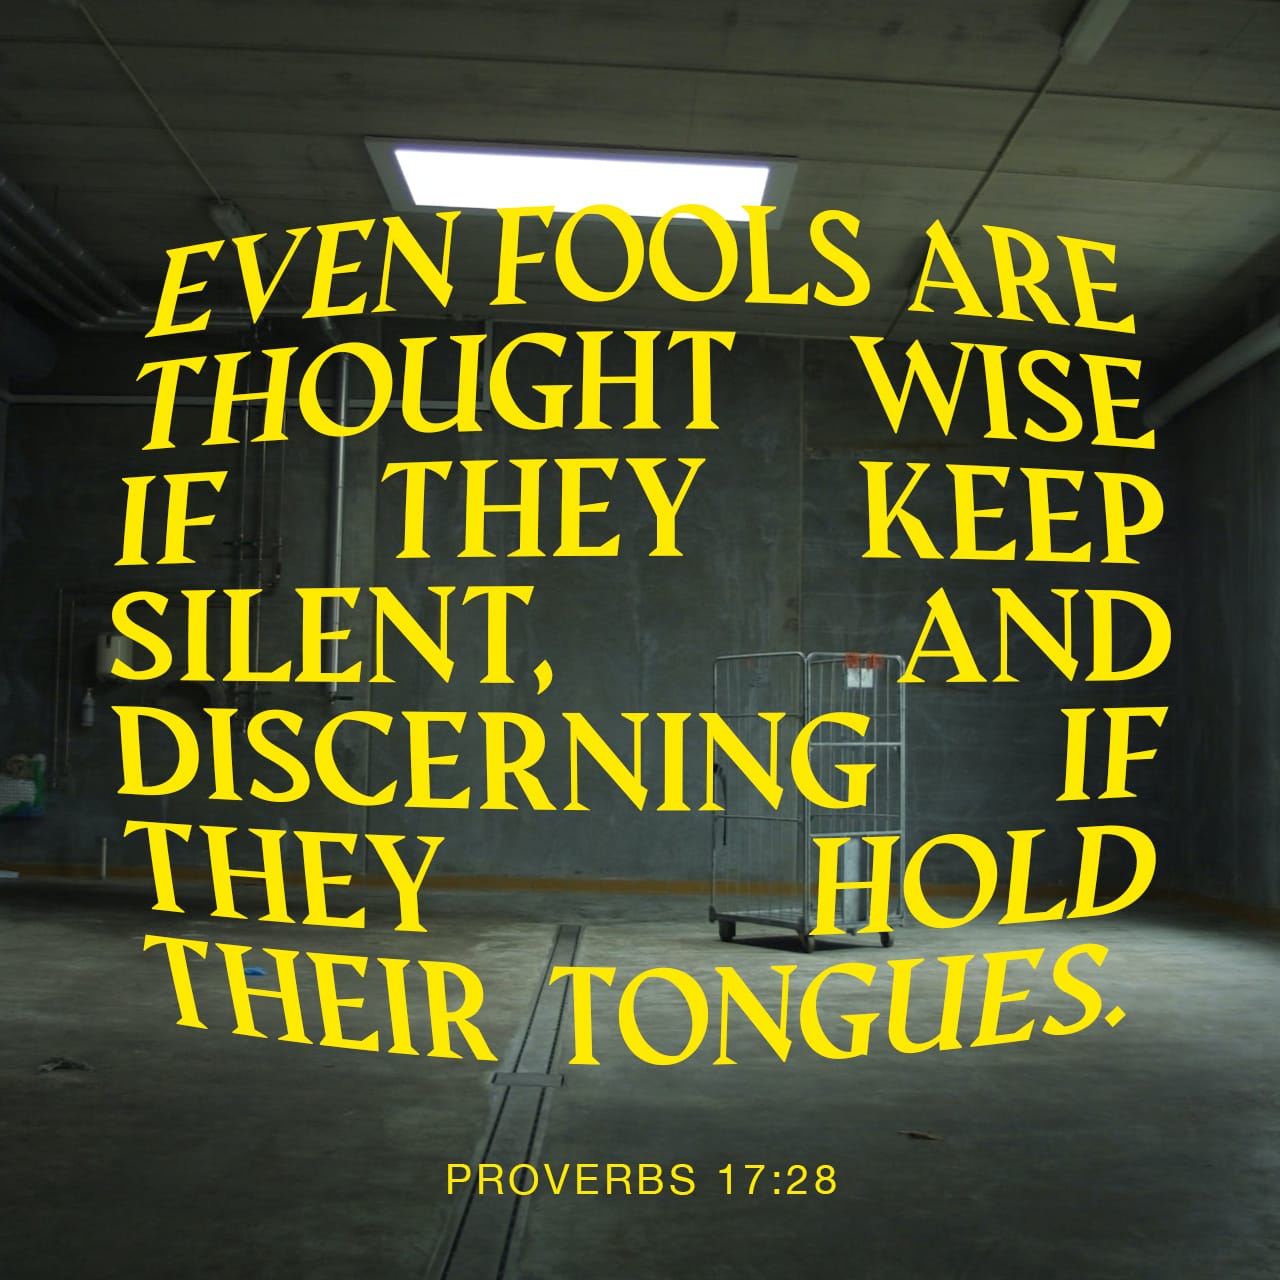 Proverbs 17:28 Even a fool, when he holdeth his peace, is counted wise;  When he shutteth his lips, he is esteemed as prudent. Even fools are  thought wise if they keep silent